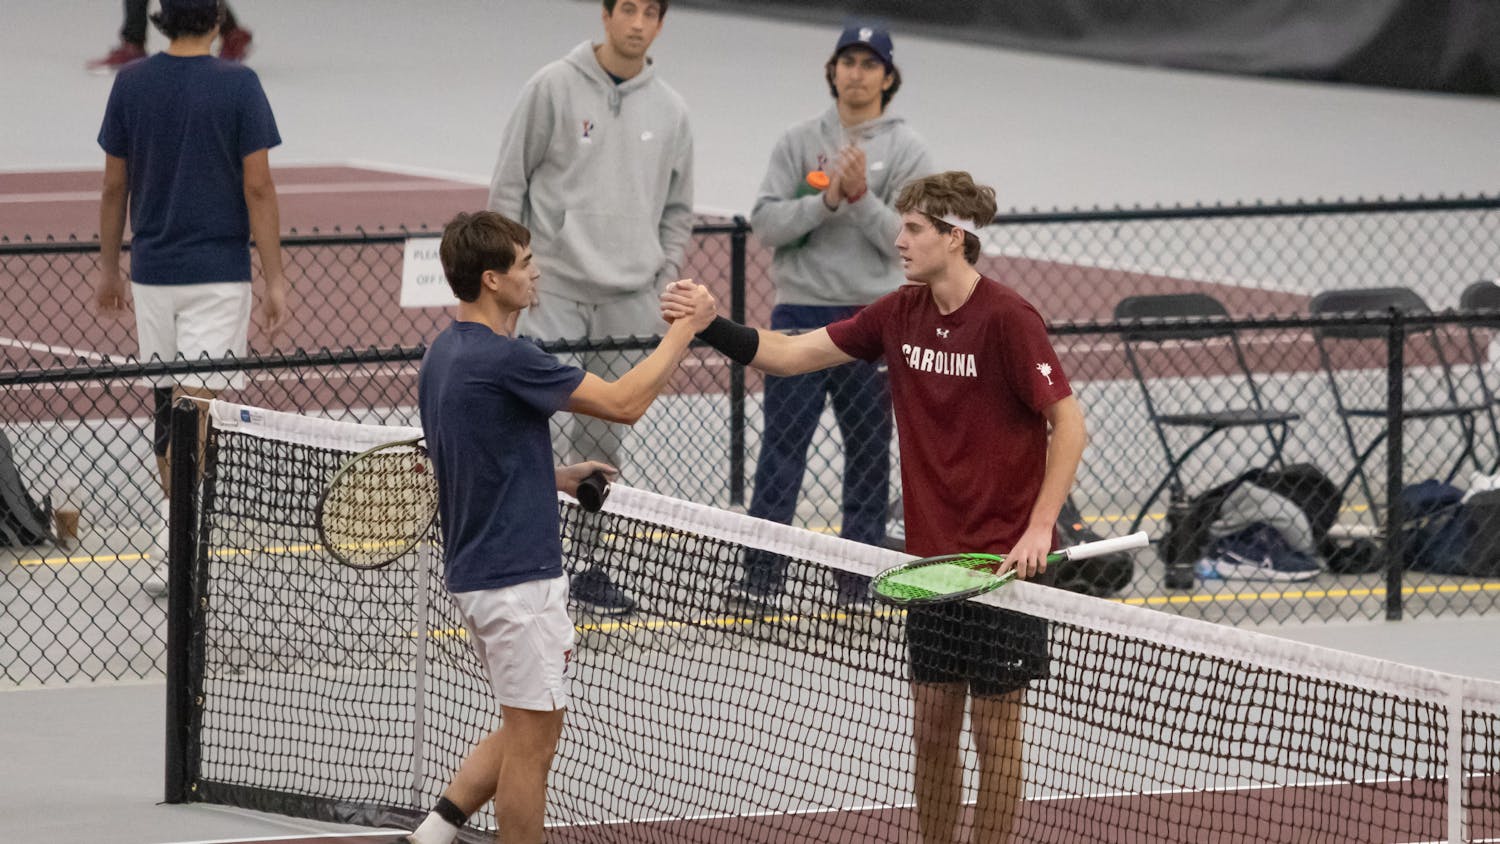 Junior Toby Samuel shakes hands after winning his singles match against Penn at the ITA Kickoff Weekend event at the Carolina Indoor Tennis Center on Jan. 28, 2023. South Carolina beat Penn 4-0.